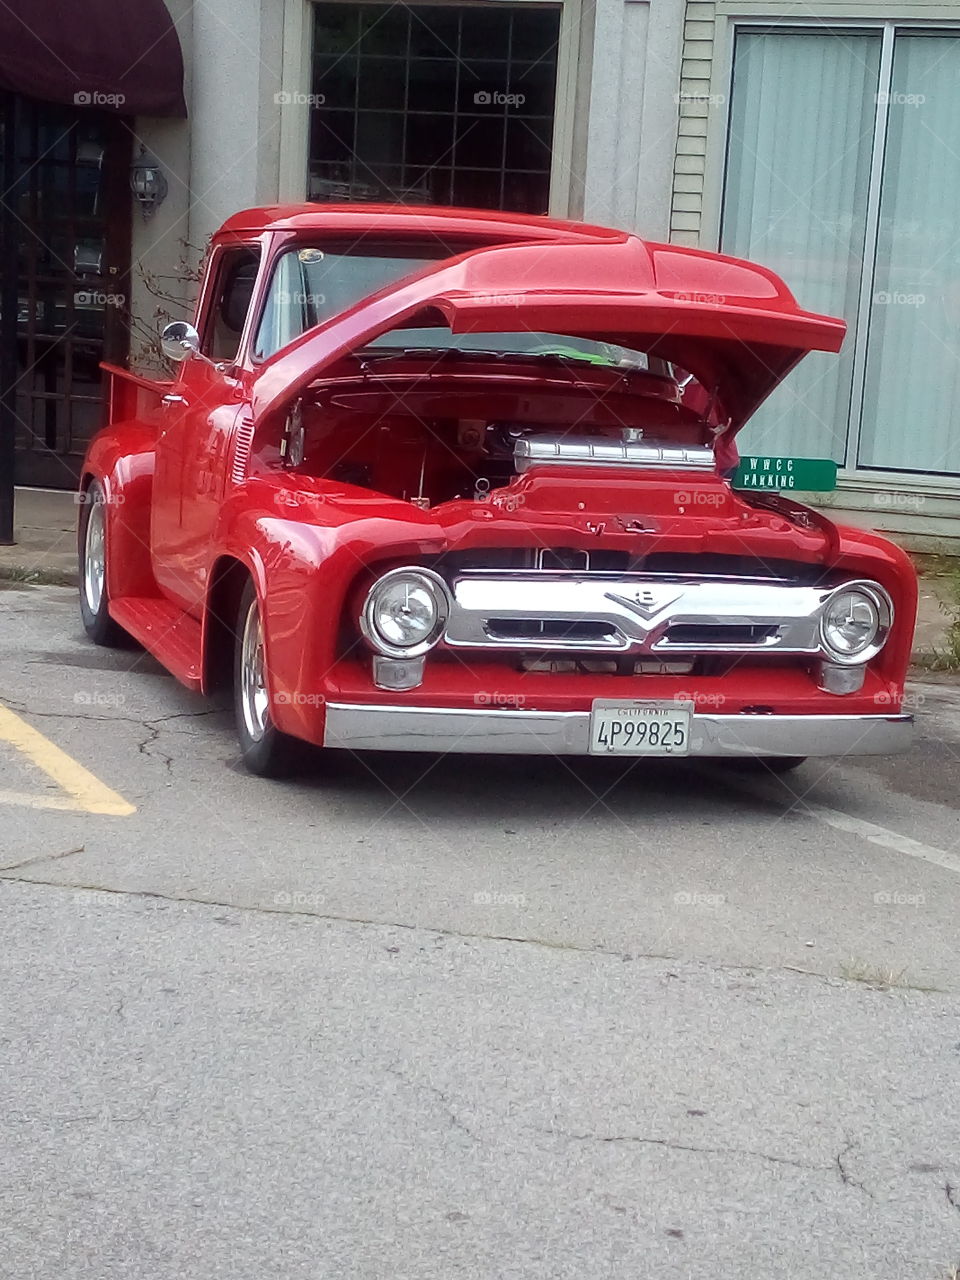 this is what summer is all about car shows! back when they built cars tough. red shiny truck